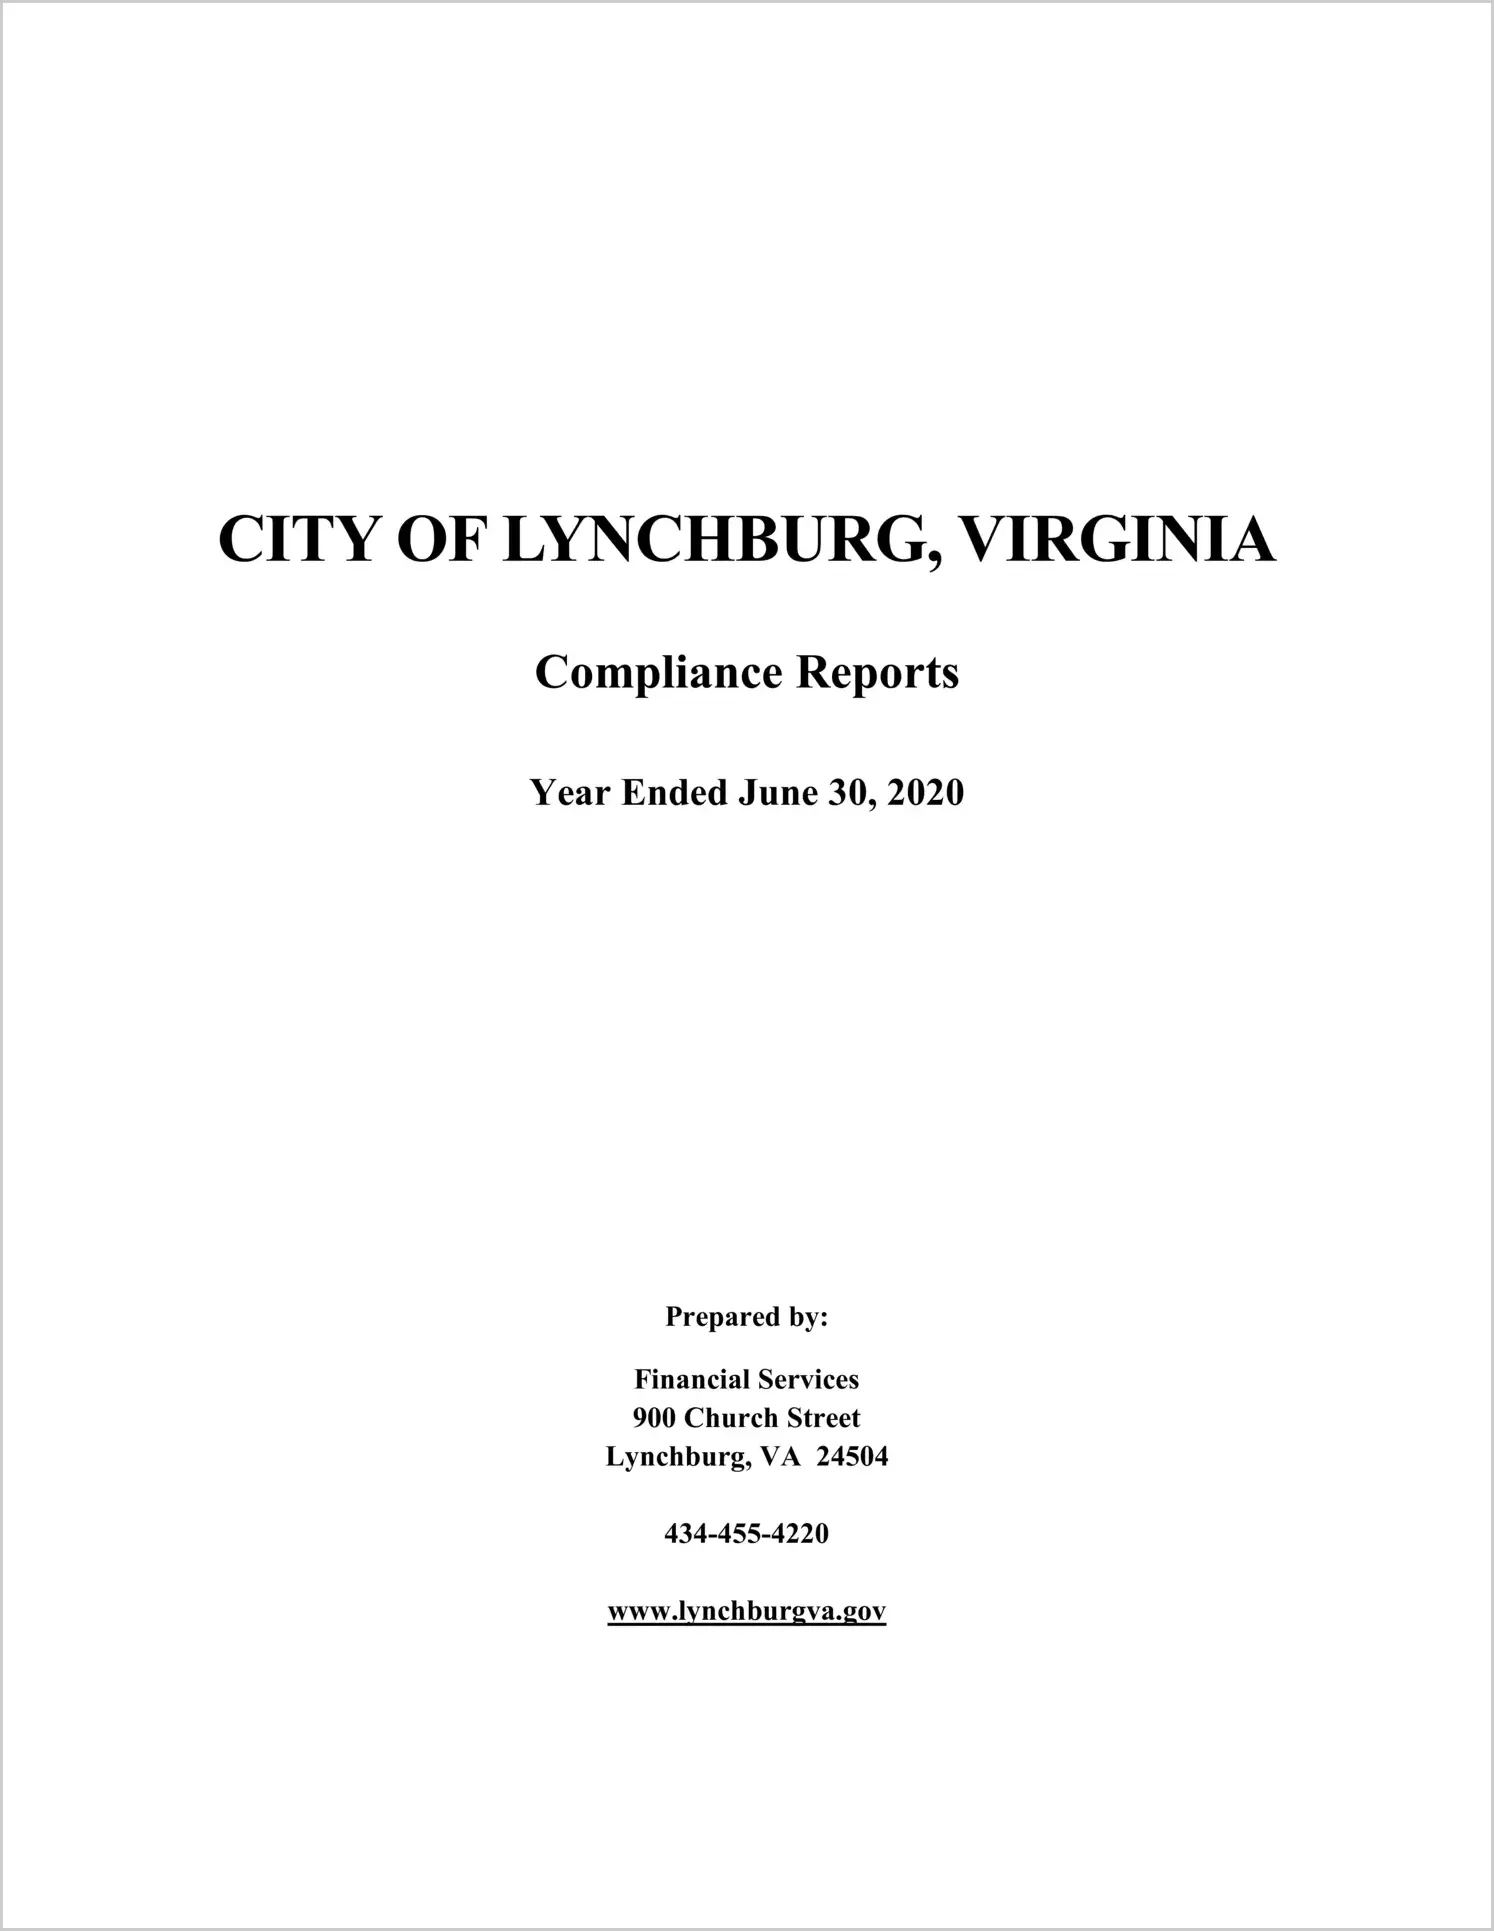 2020 Internal Control and Compliance Report for City of Lynchburg